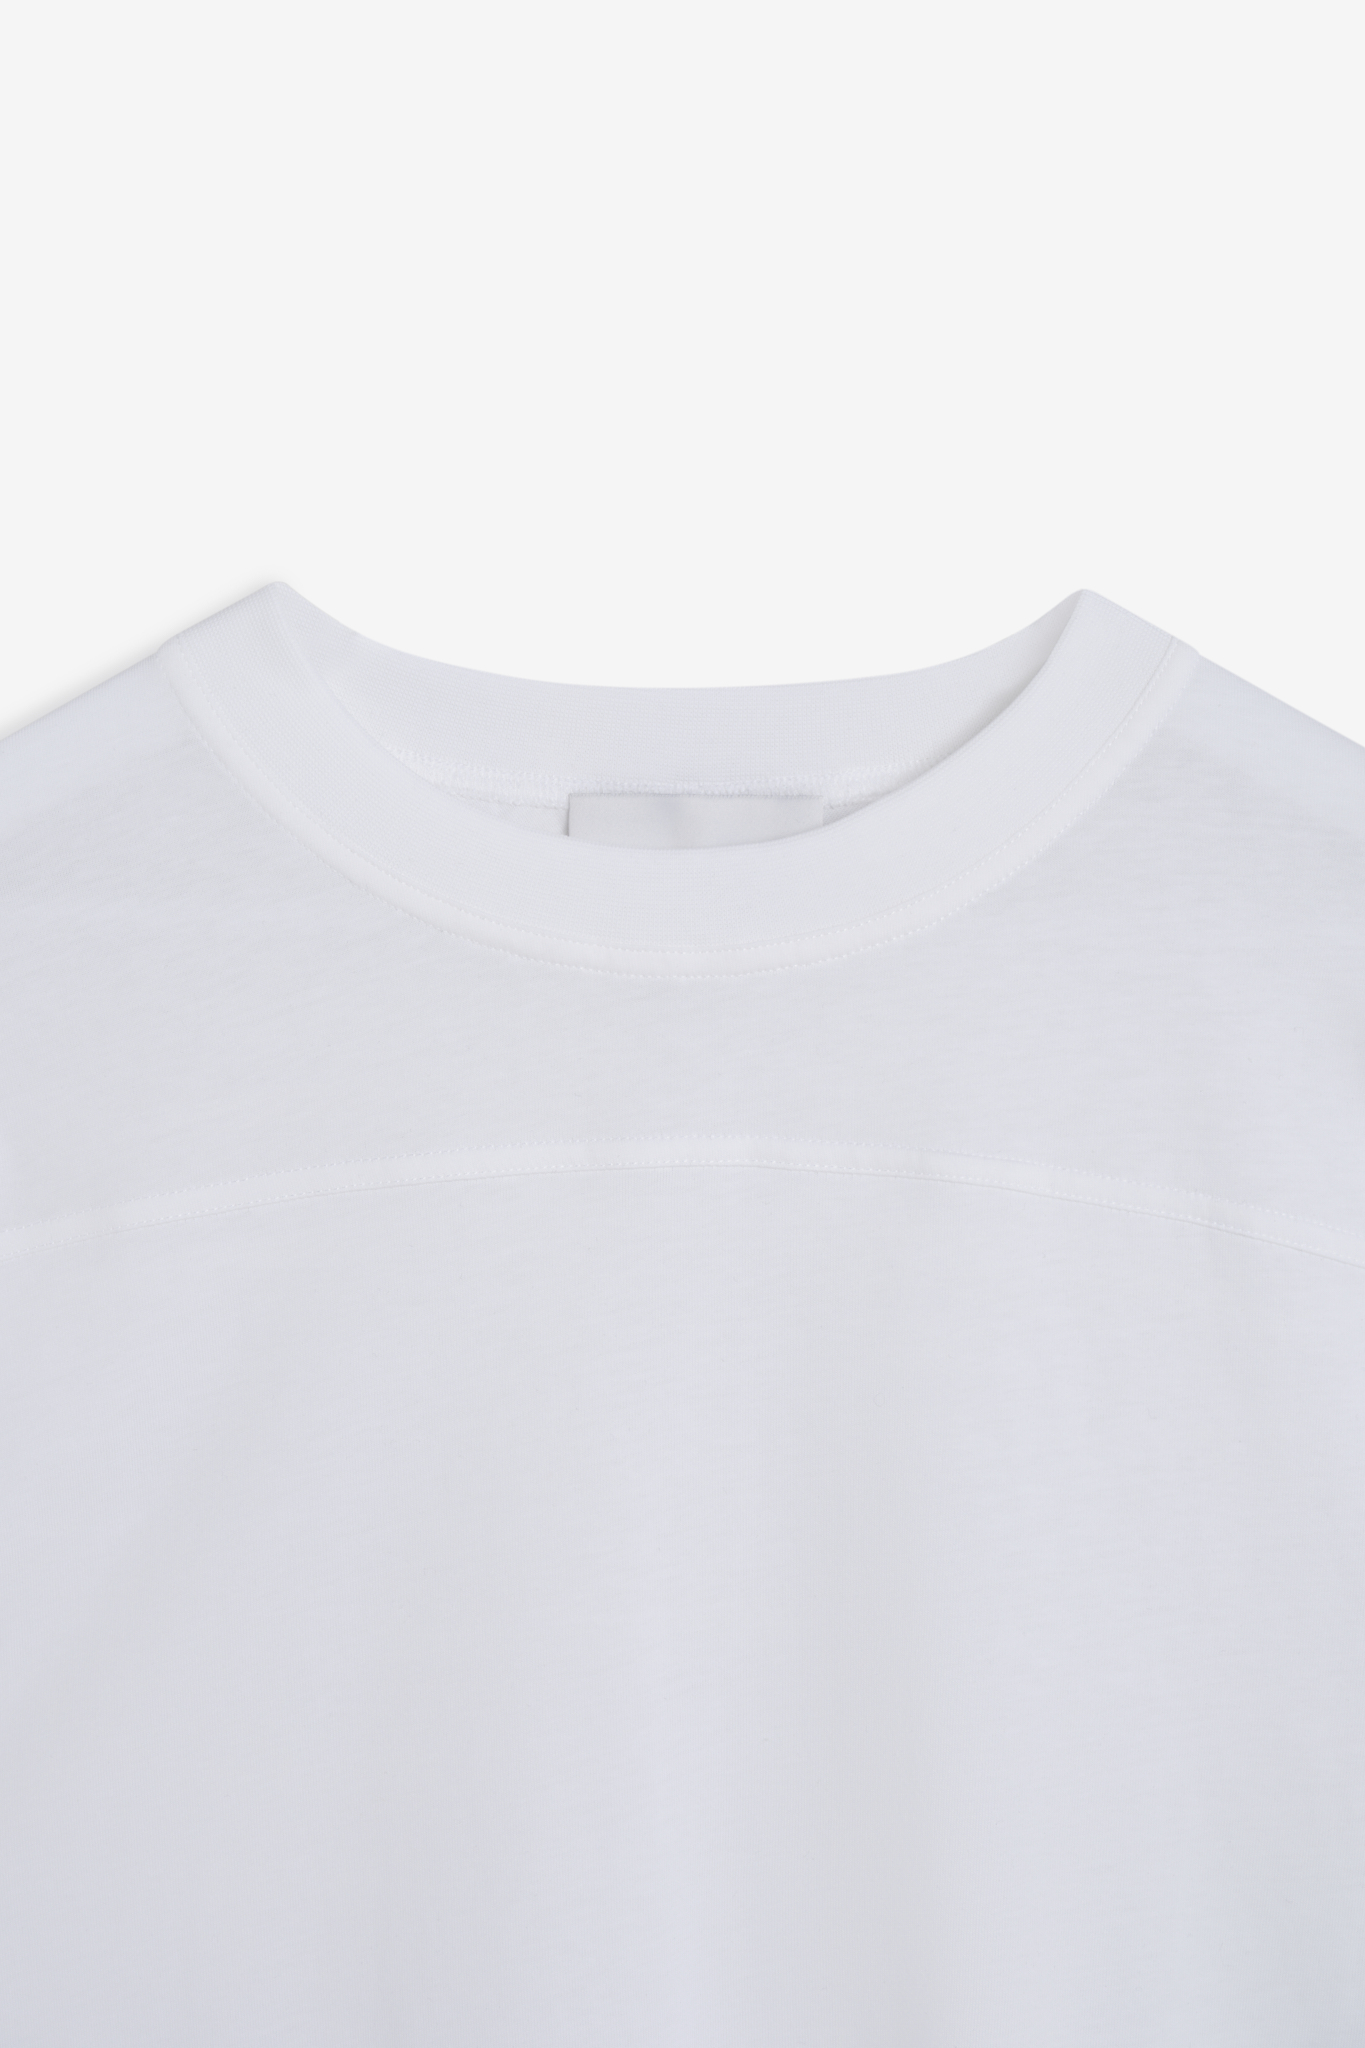 S090 WELT TEE_WHITE_FRONT_DETAIL_01